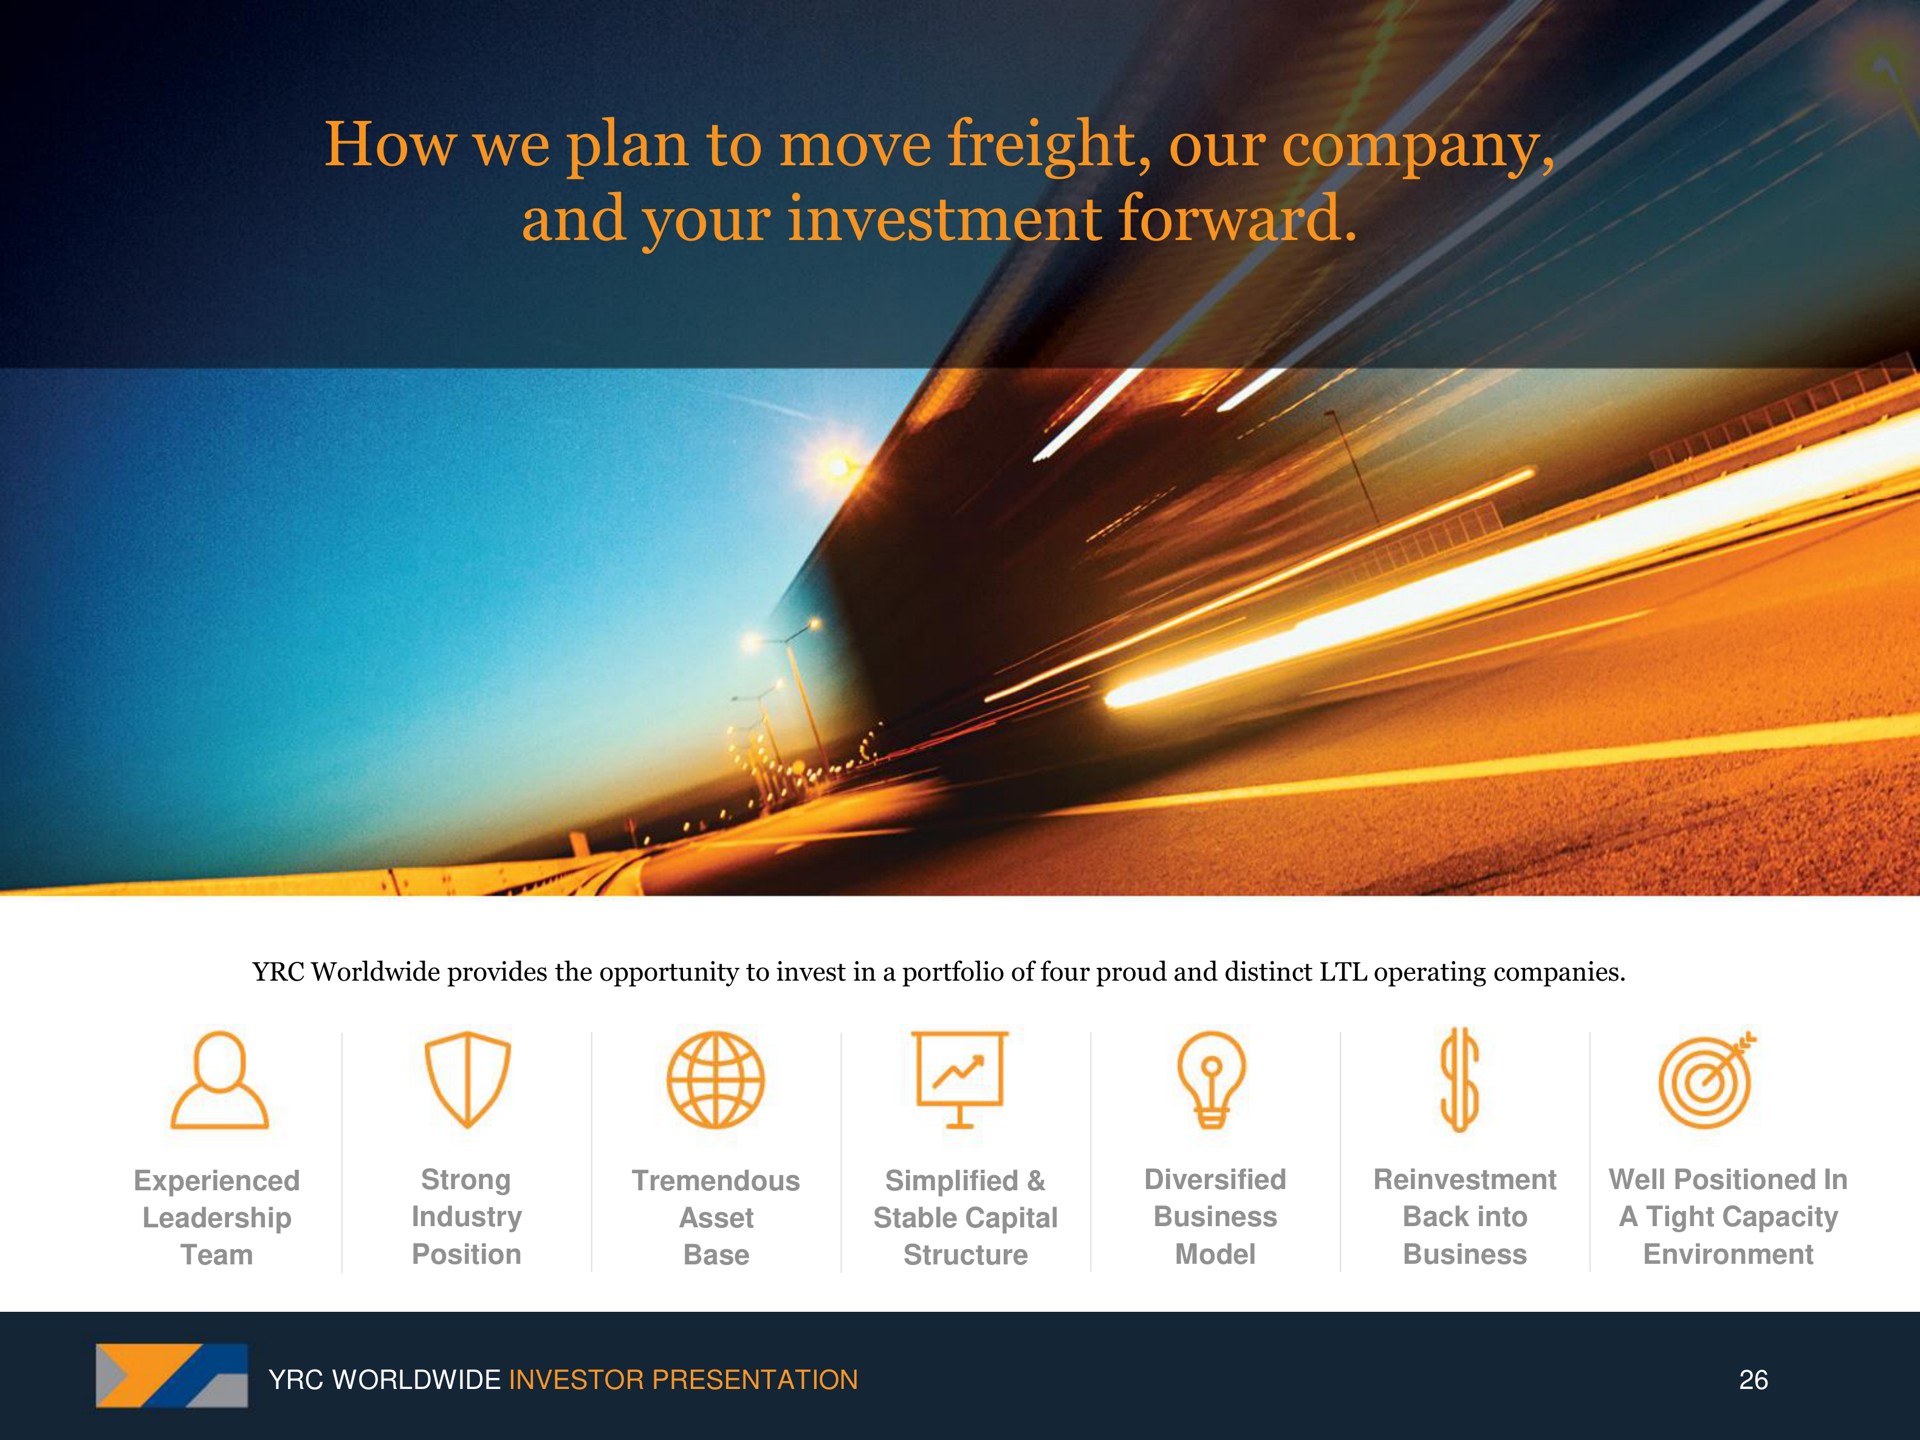 how we plan to move freight our company and your investment forward | Yellow Corporation